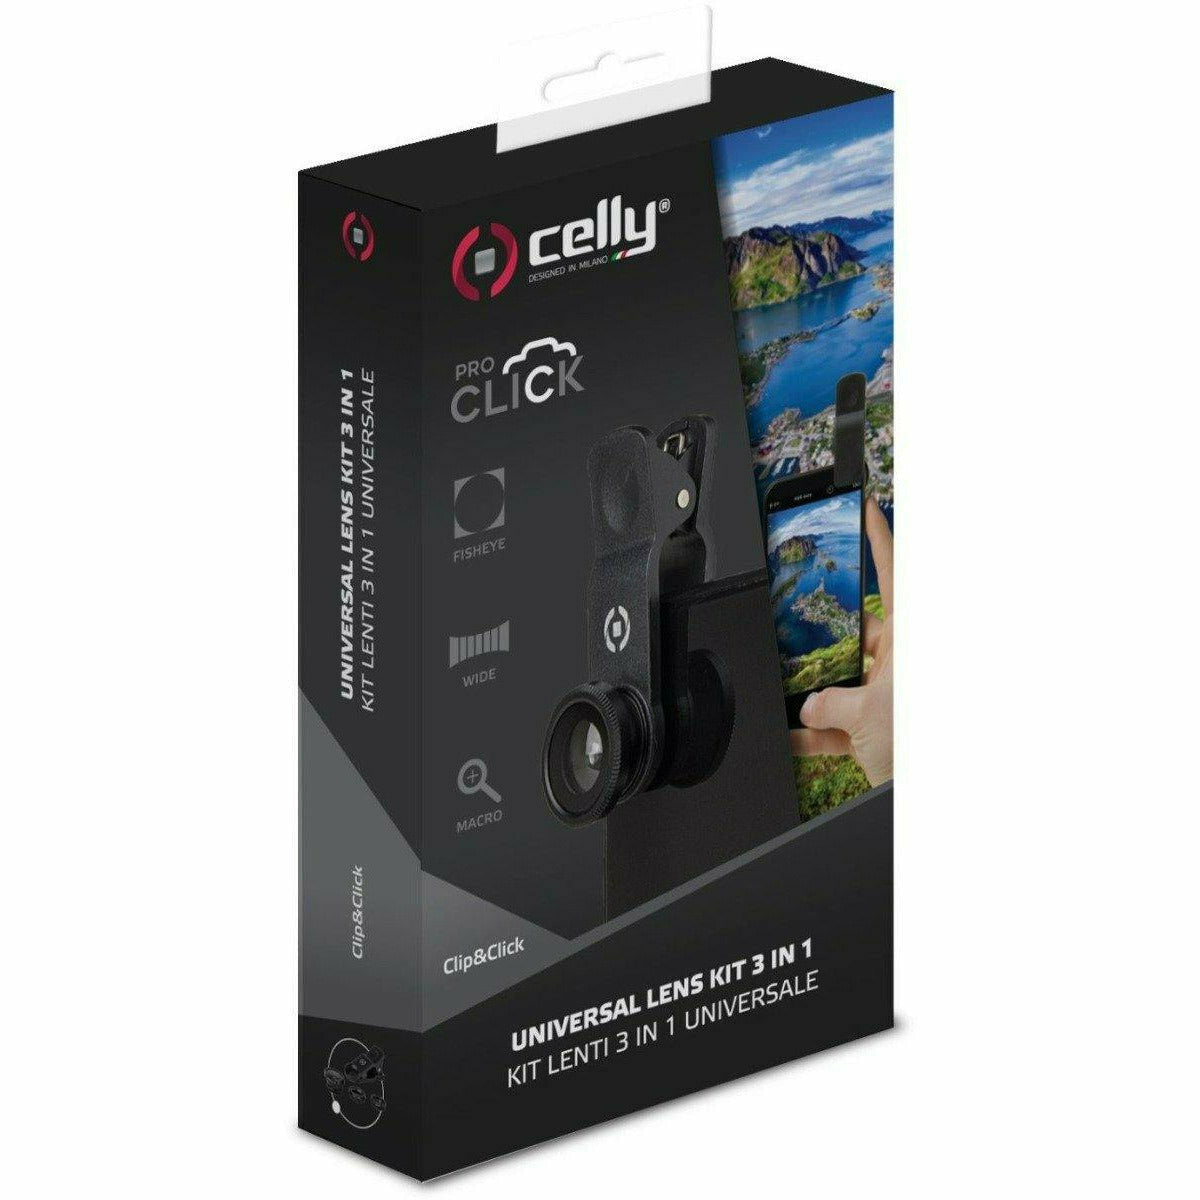 Celly Clip & Click 3-in-1 Lens Kit - Dragon Image